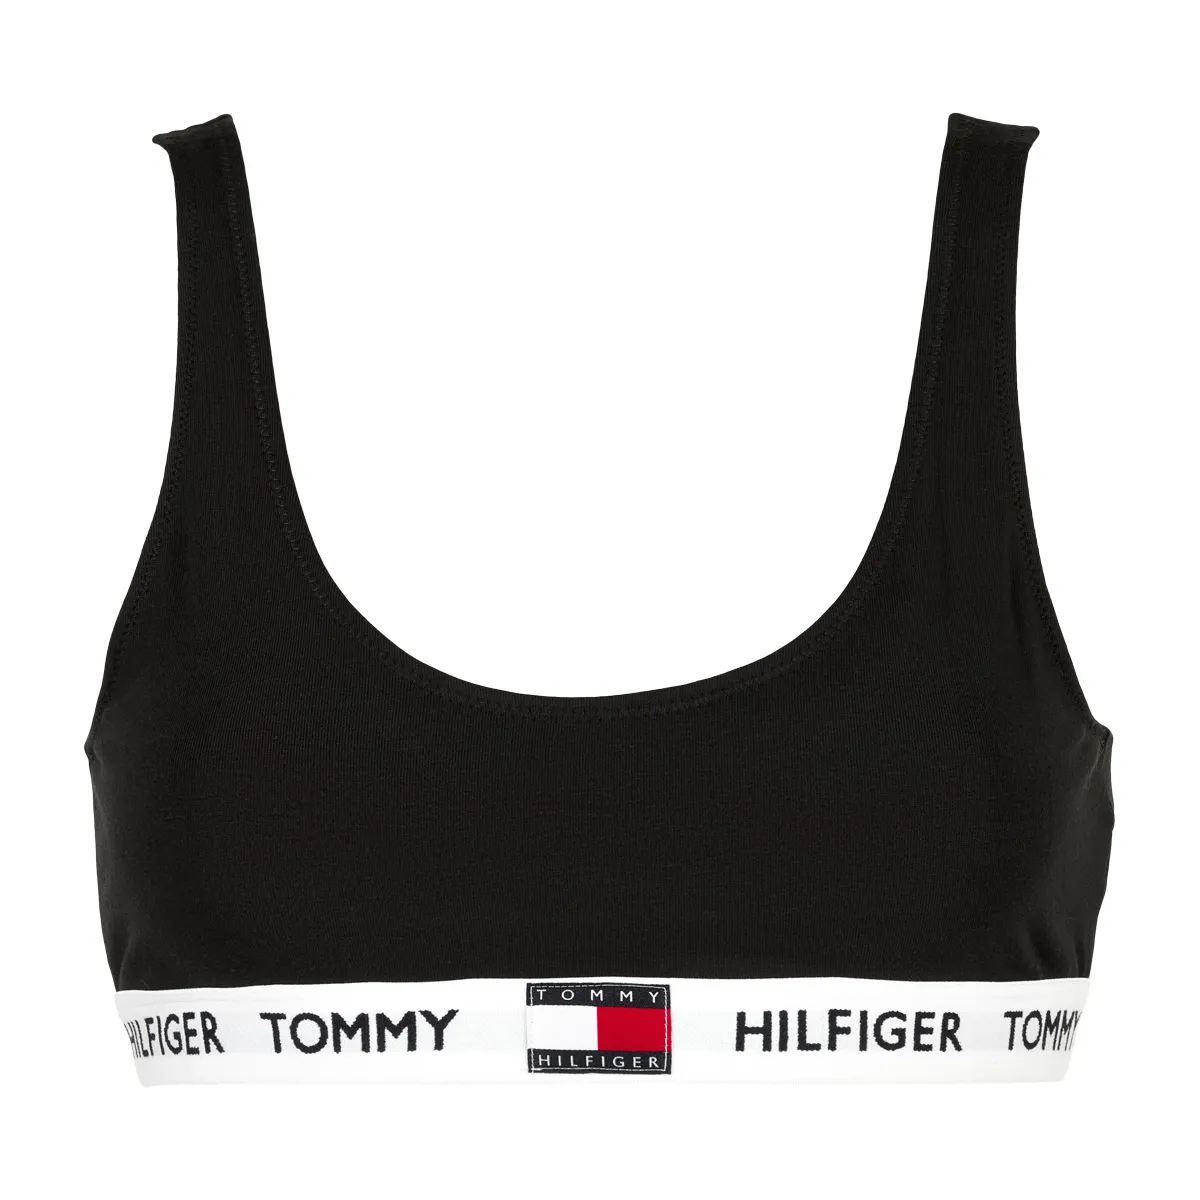 Tommy Hilfiger underwear • Large selection ⇒ Save up to 50%